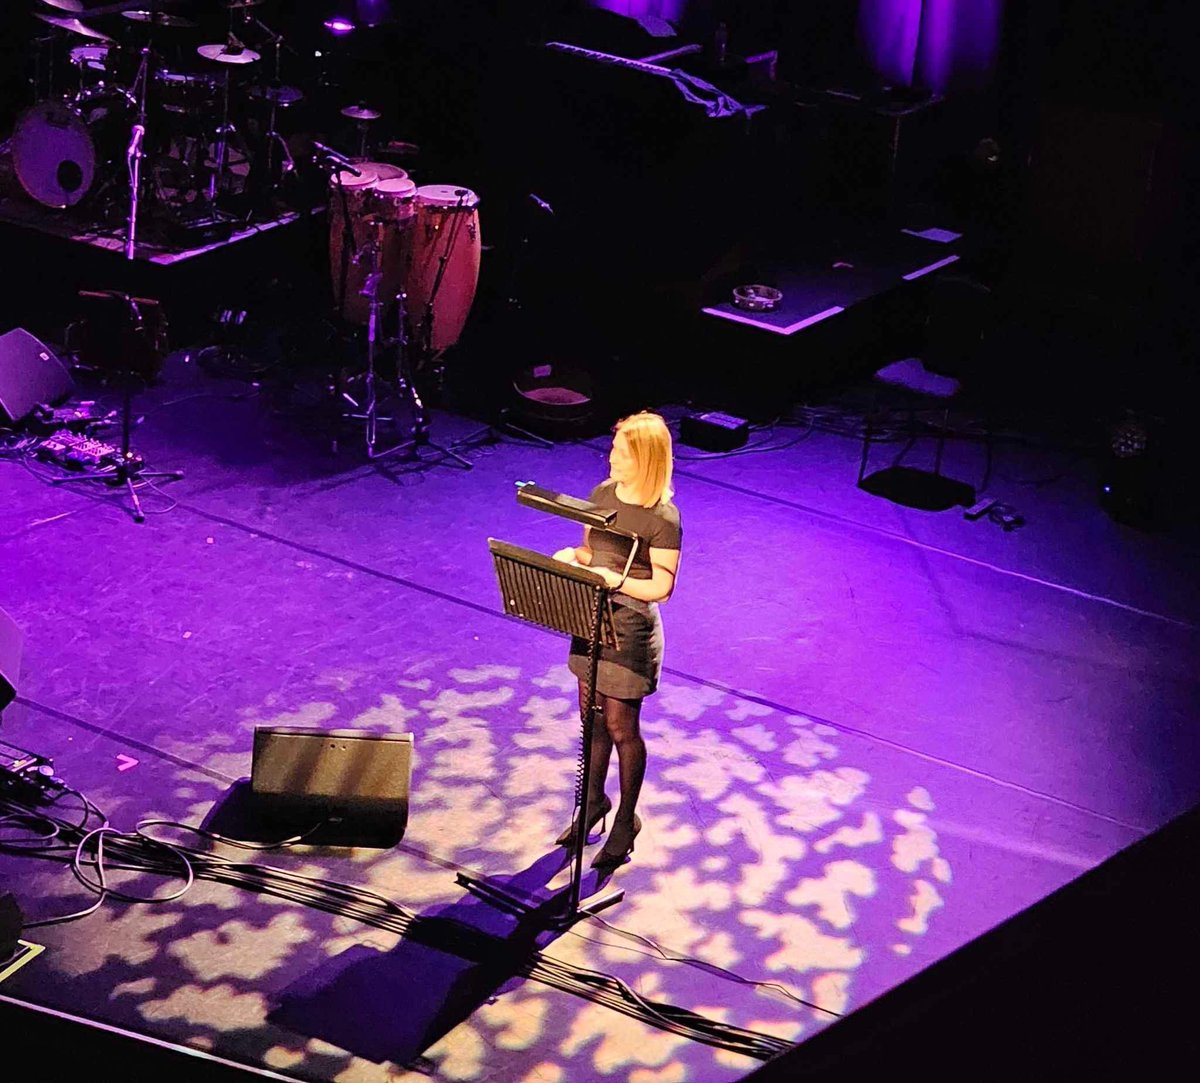 It’s been a bit of a turbulent few days of illness and injury in the McNeill household but last night will live long in the memory Thank you to friends and fellow performers for all their support as I read poems on stage at Glasgow Concert Hall to raise funds for @MedicalAidPal